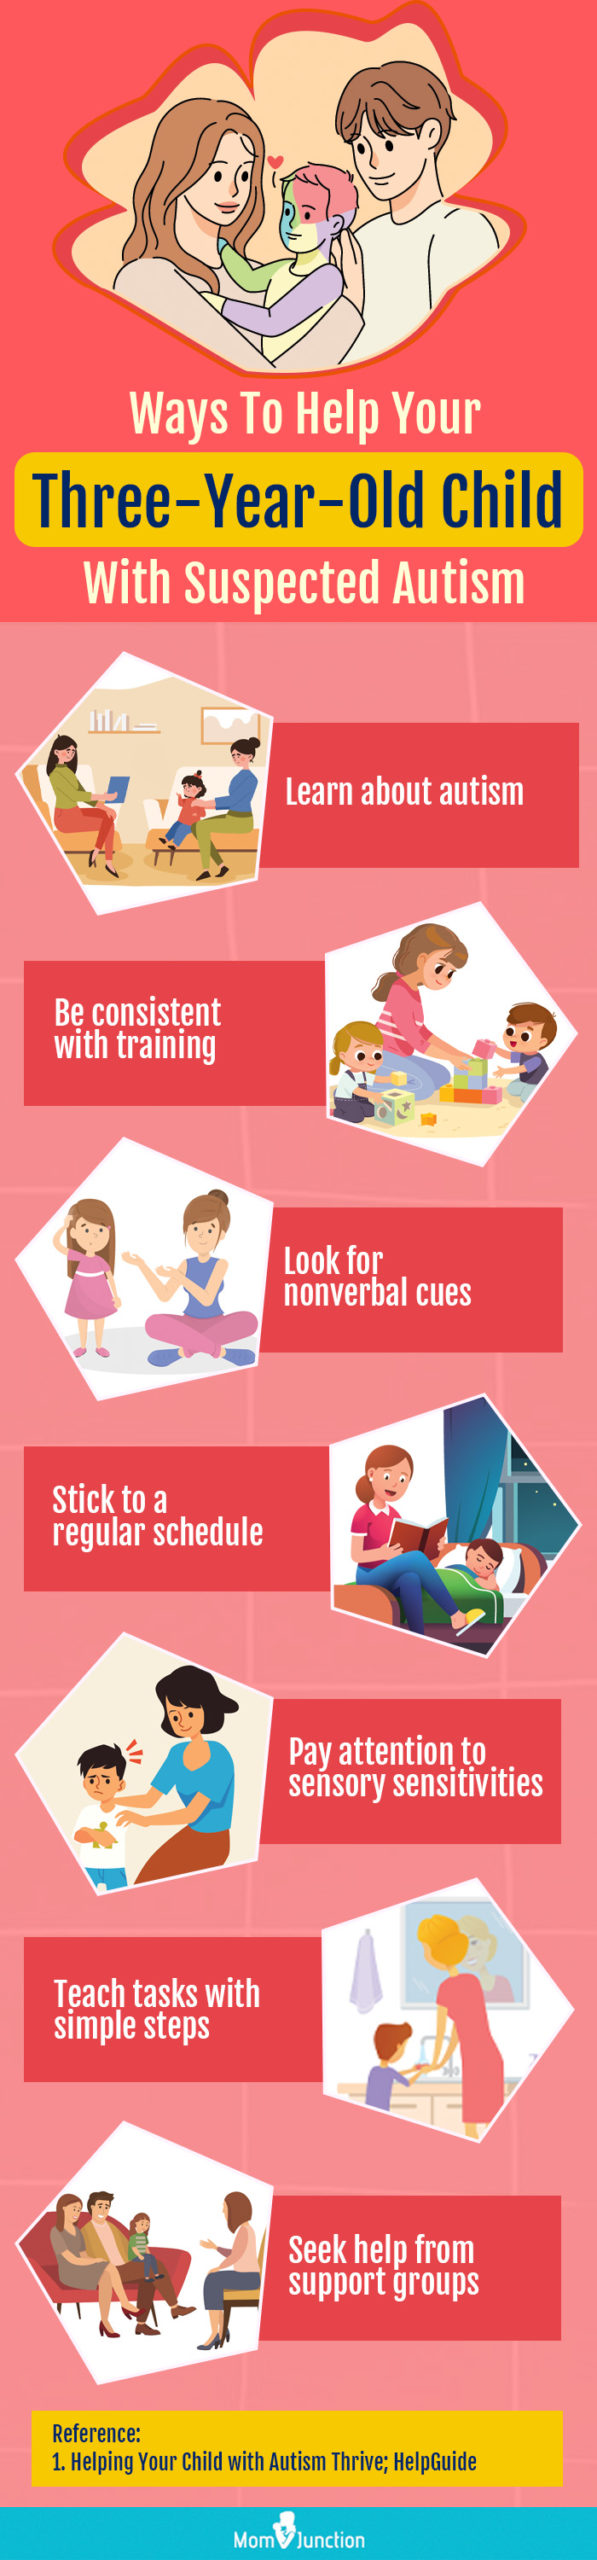 ways to help your three year old child with suspected autism [infographic]